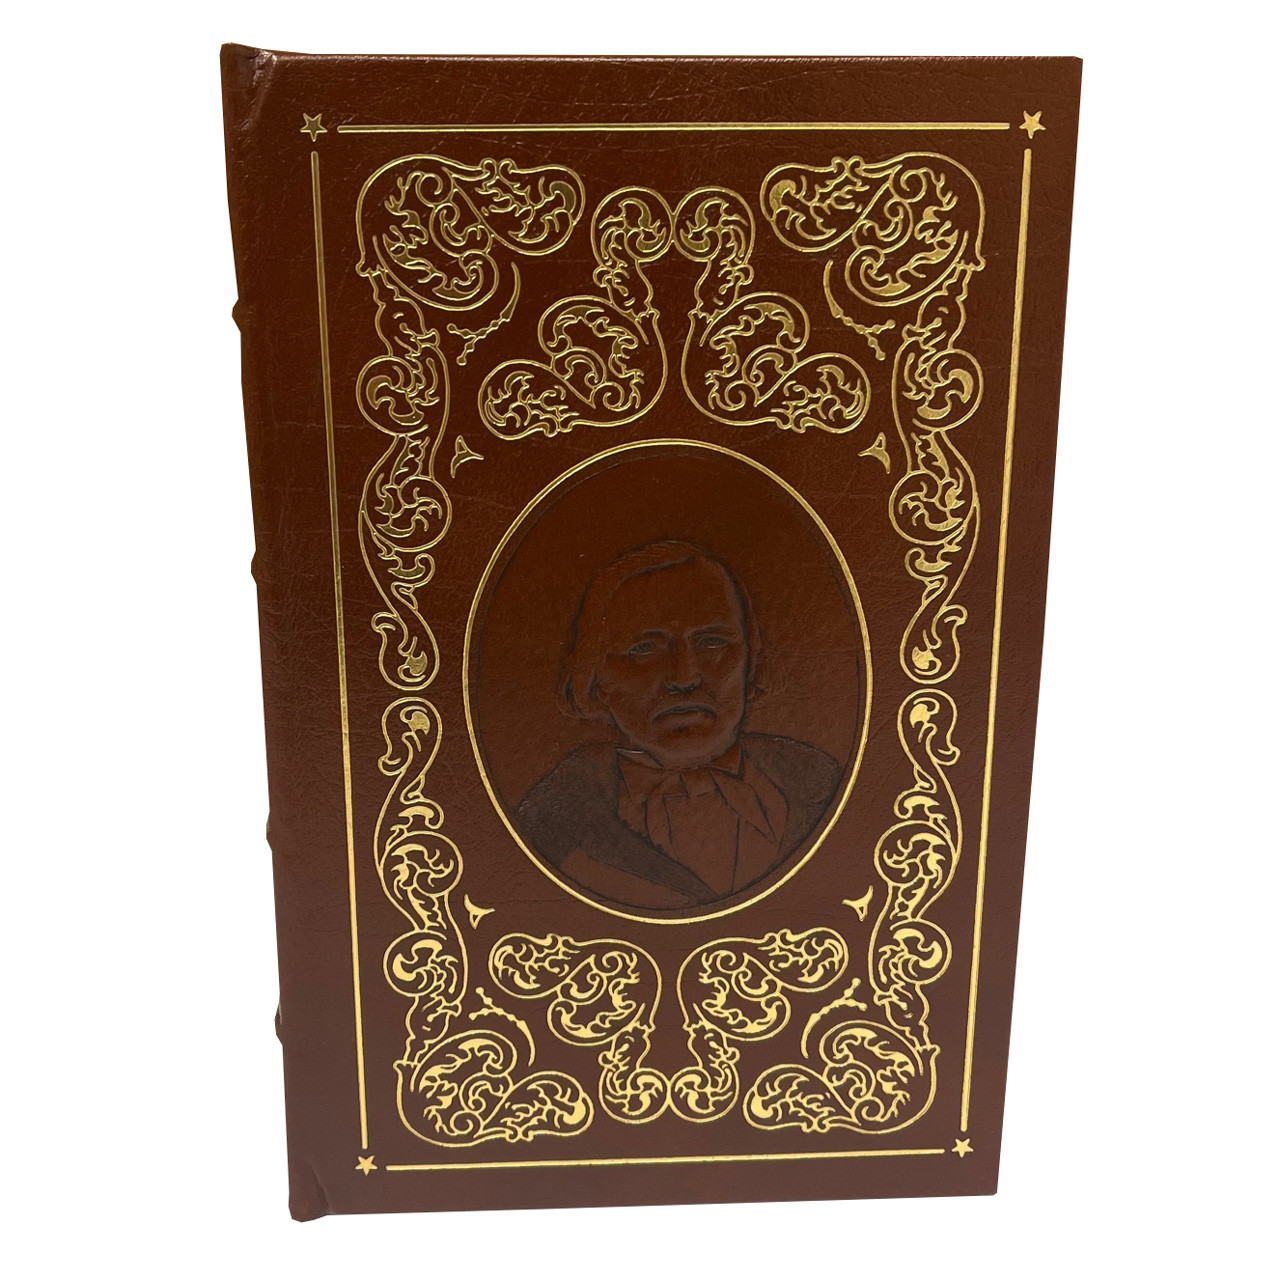 Harvey Lews Carter "Dear Old Kit" Limited Collector's Edition, Leather Bound [Very Fine]